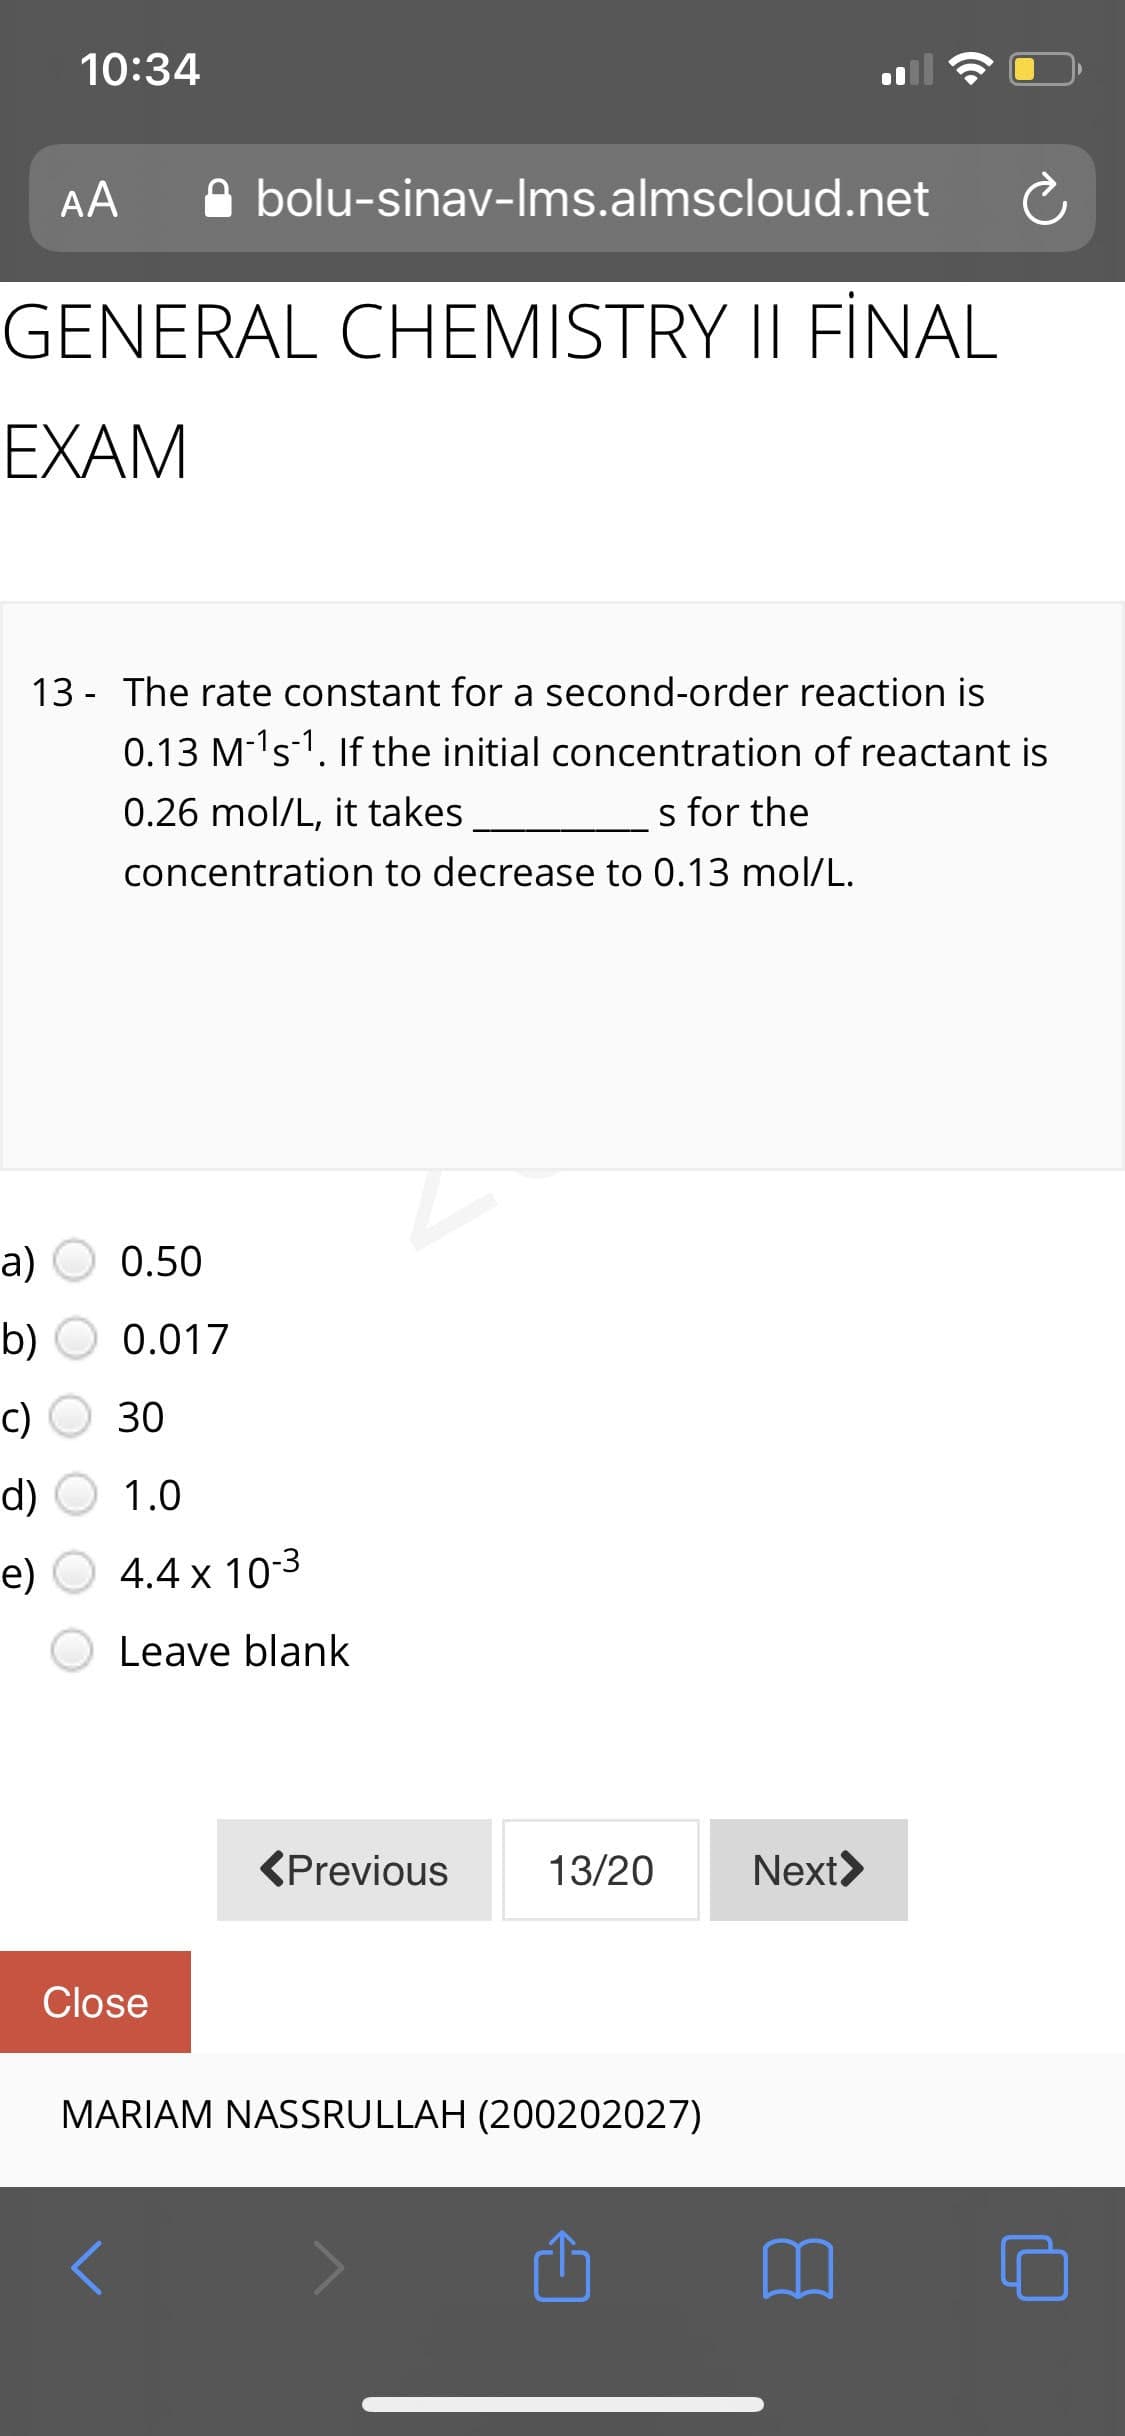 10:34
AA
A bolu-sinav-Ims.almscloud.net
GENERAL CHEMISTRY II FİNAL
EXAM
13 - The rate constant for a second-order reaction is
0.13 M-'s-1. If the initial concentration of reactant is
0.26 mol/L, it takes
s for the
concentration to decrease to 0.13 mol/L.
a) O 0.50
b)
0.017
c)
30
d)
1.0
е)
4.4 x 10-3
Leave blank
<Previous
13/20
Next>
Close
MARIAM NASSRULLAH (200202027)
